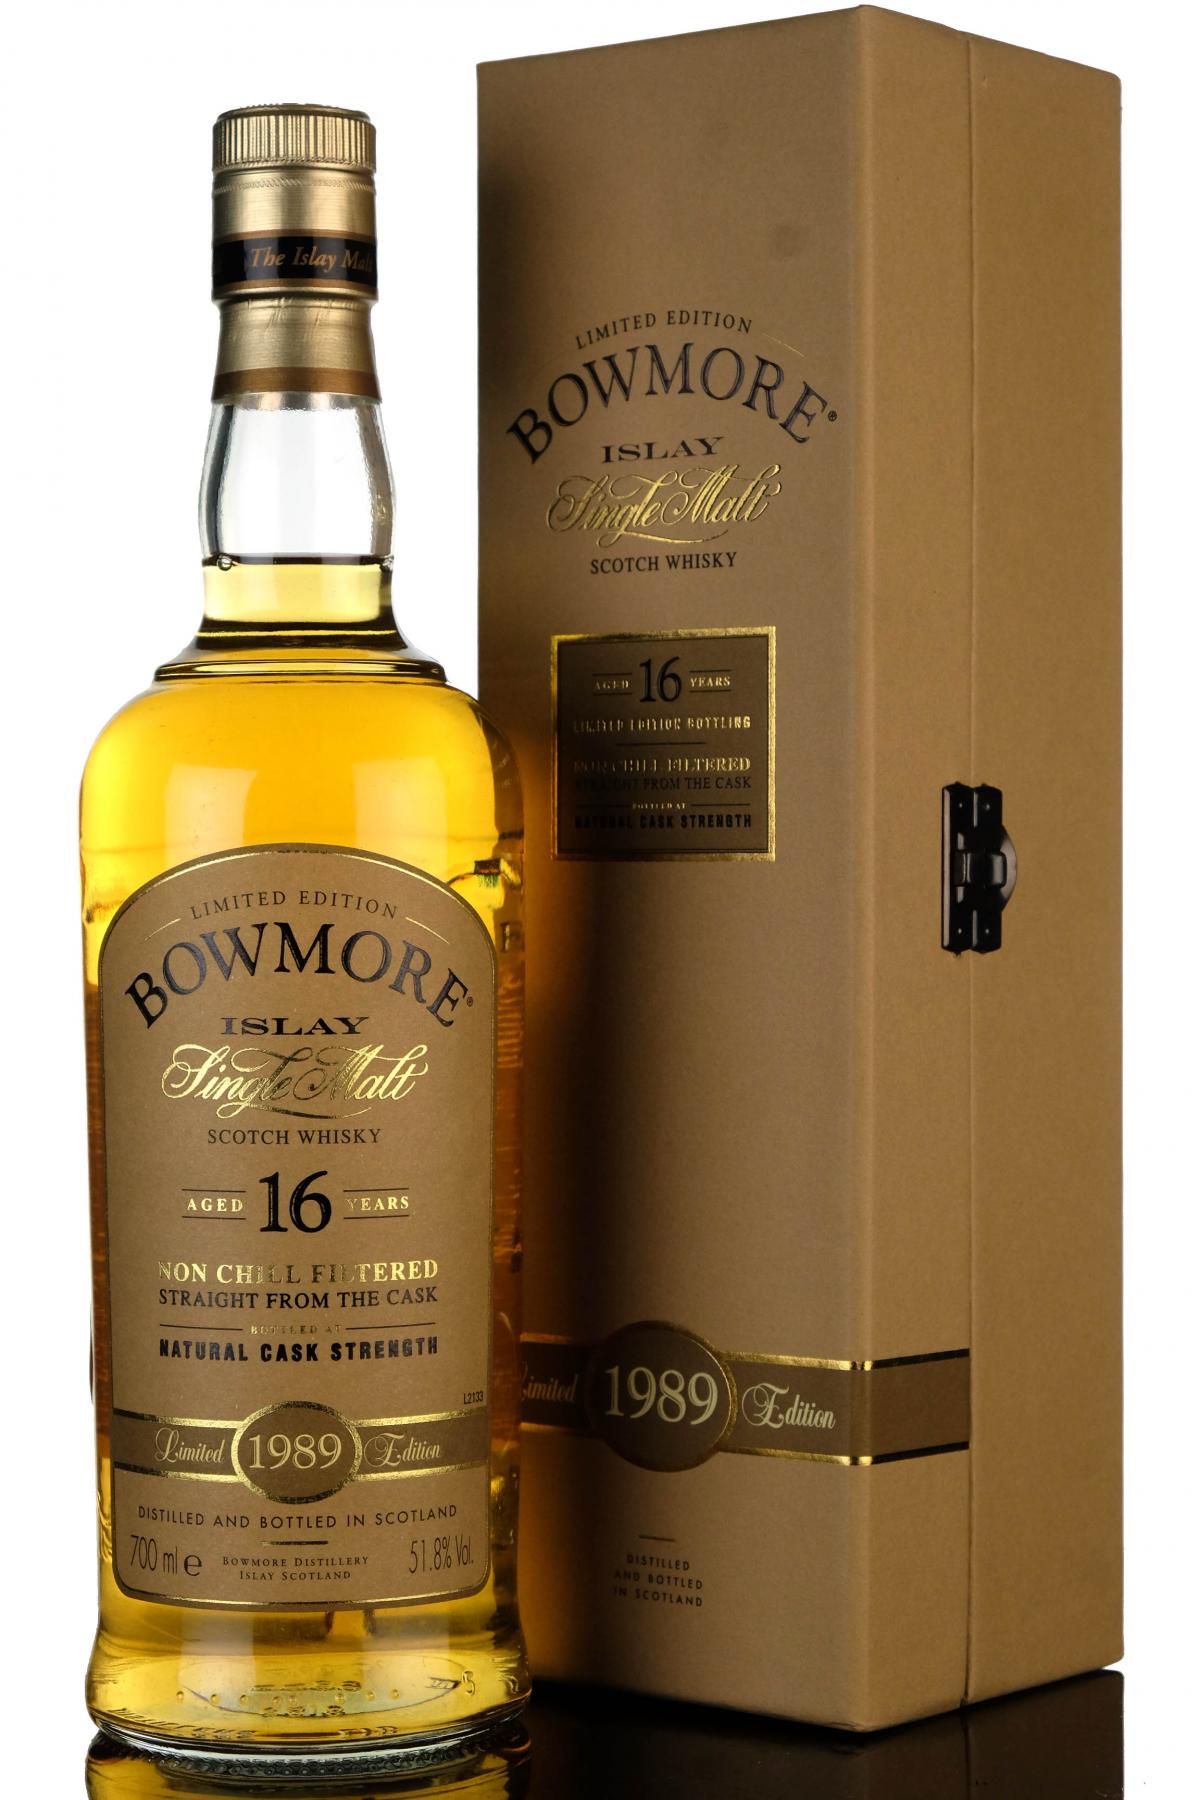 Bowmore 1989 - 16 Year Old